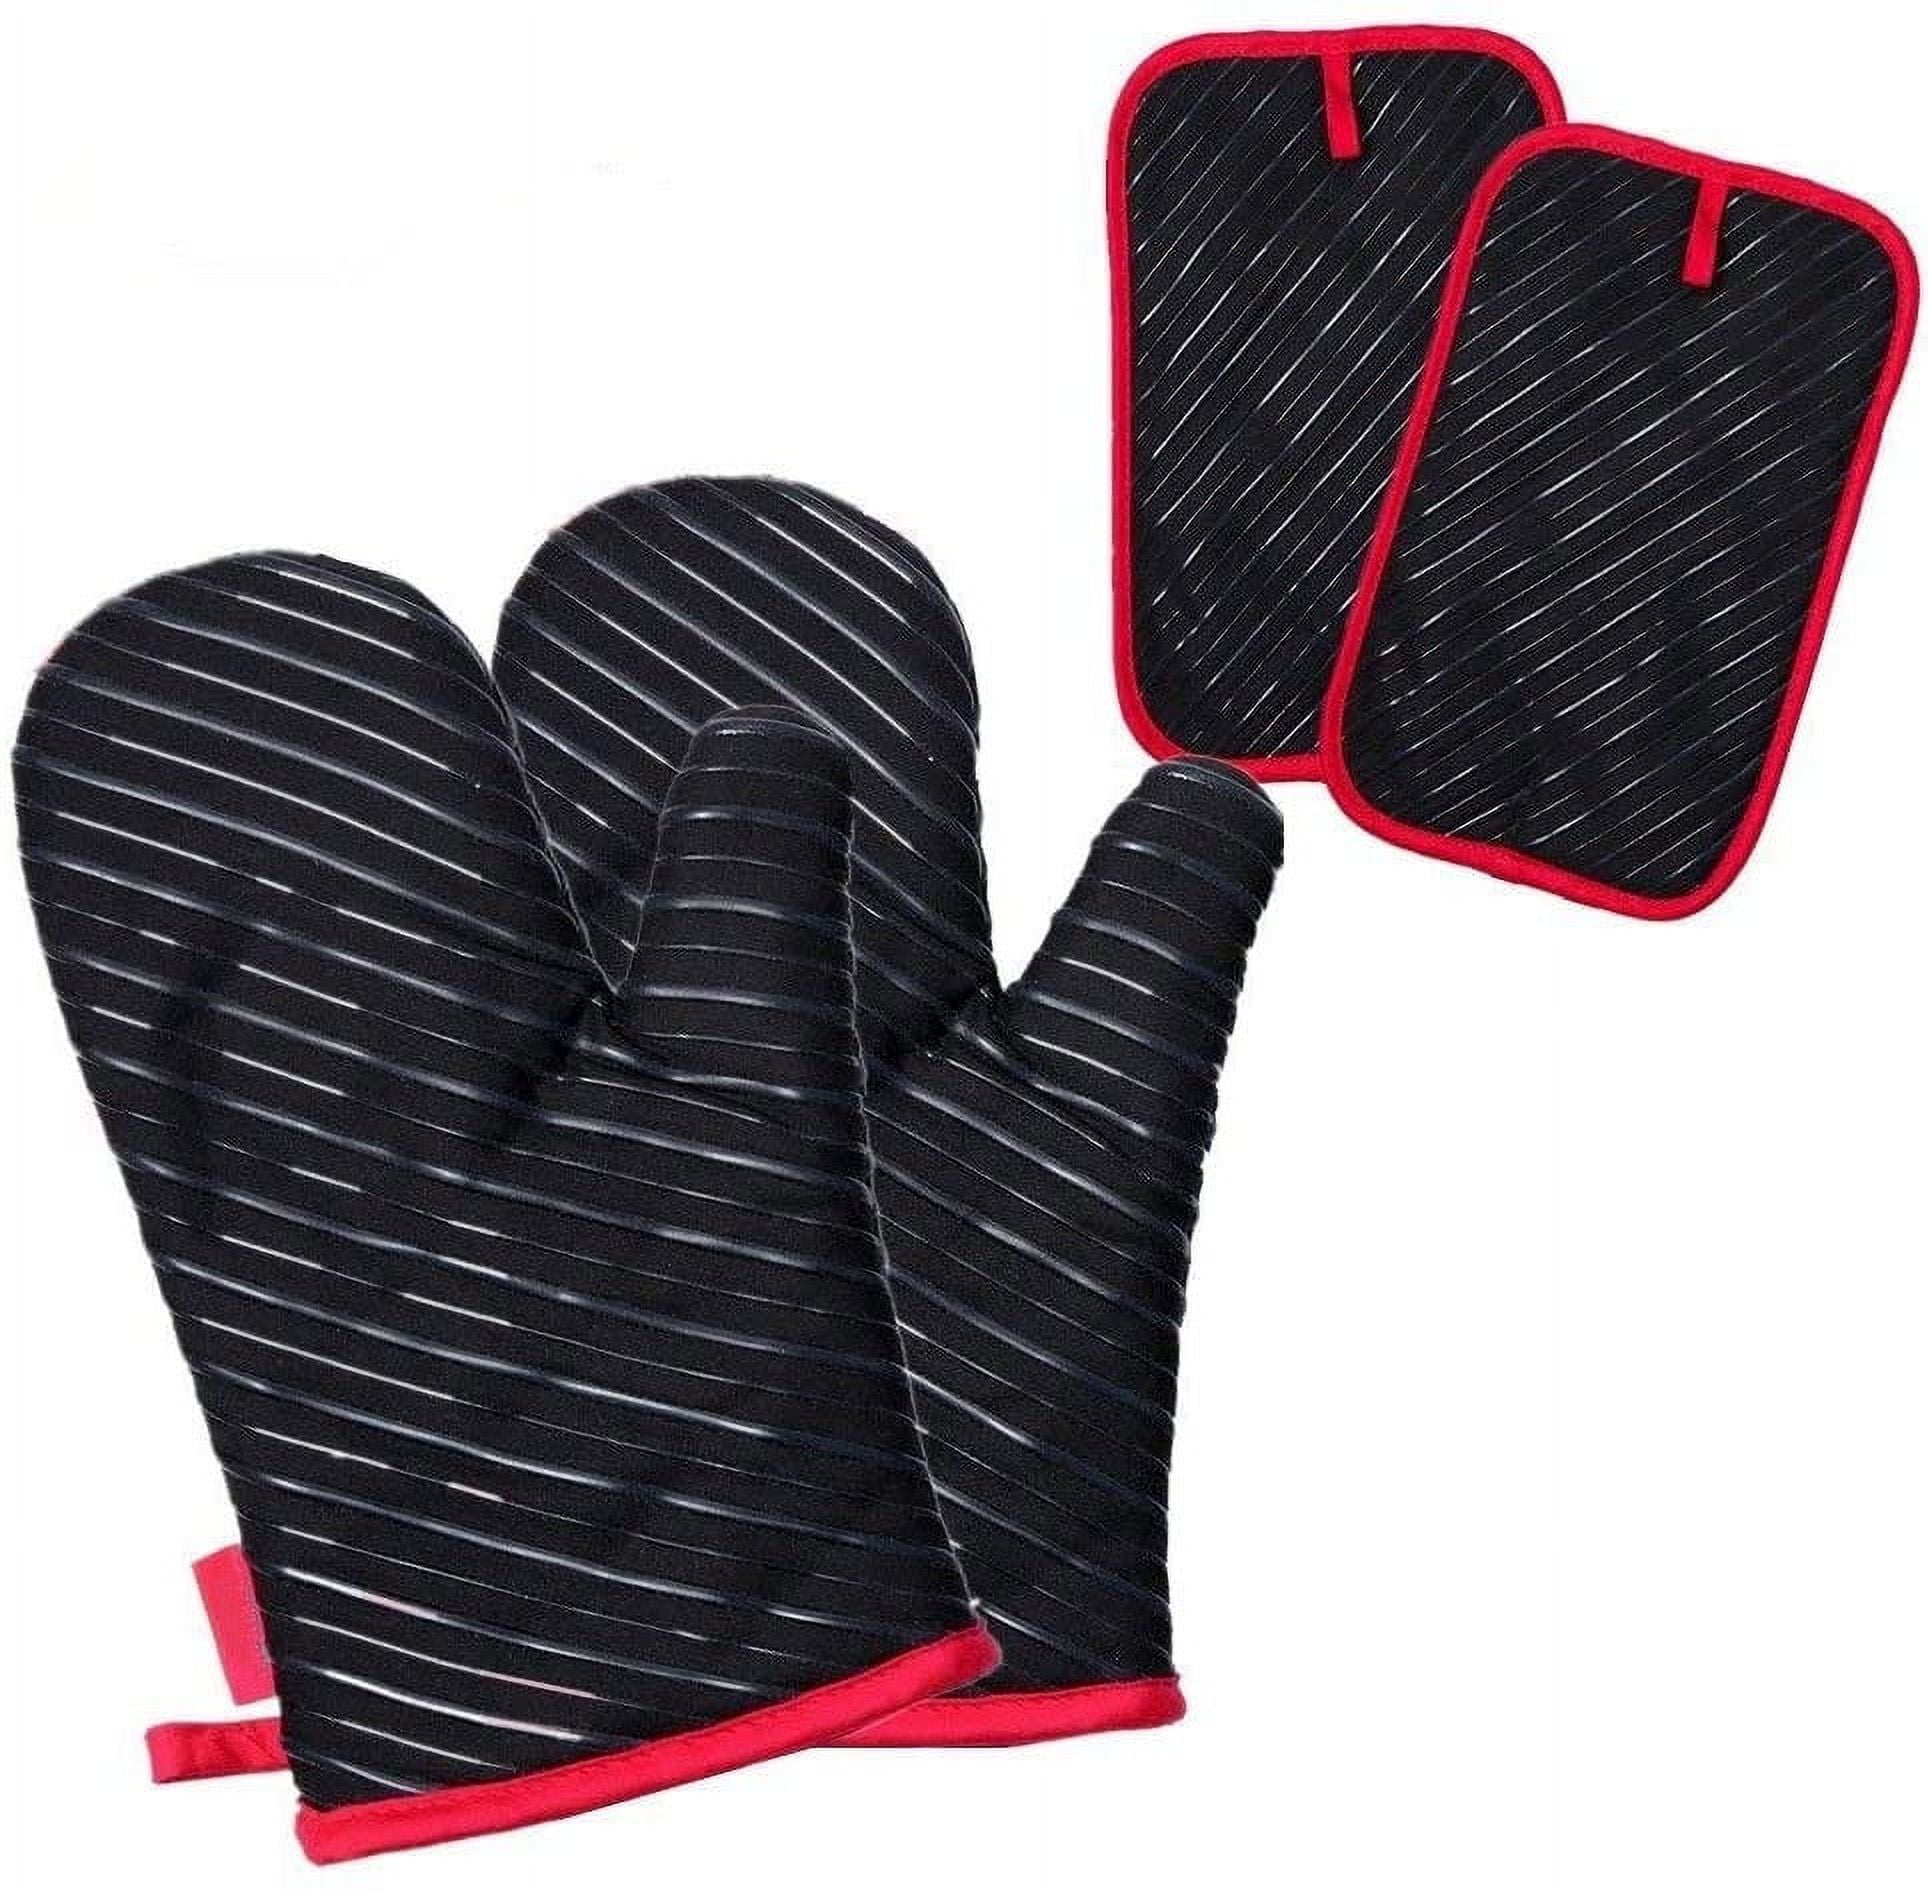 Piduules Set of 4 Oven Mitts and Pot Holders, 482 F Heat Resistant Hot Plate Moving Non-Slip Gloves for BBQ, Grill, Baking, Cooking, Oven, Microwave